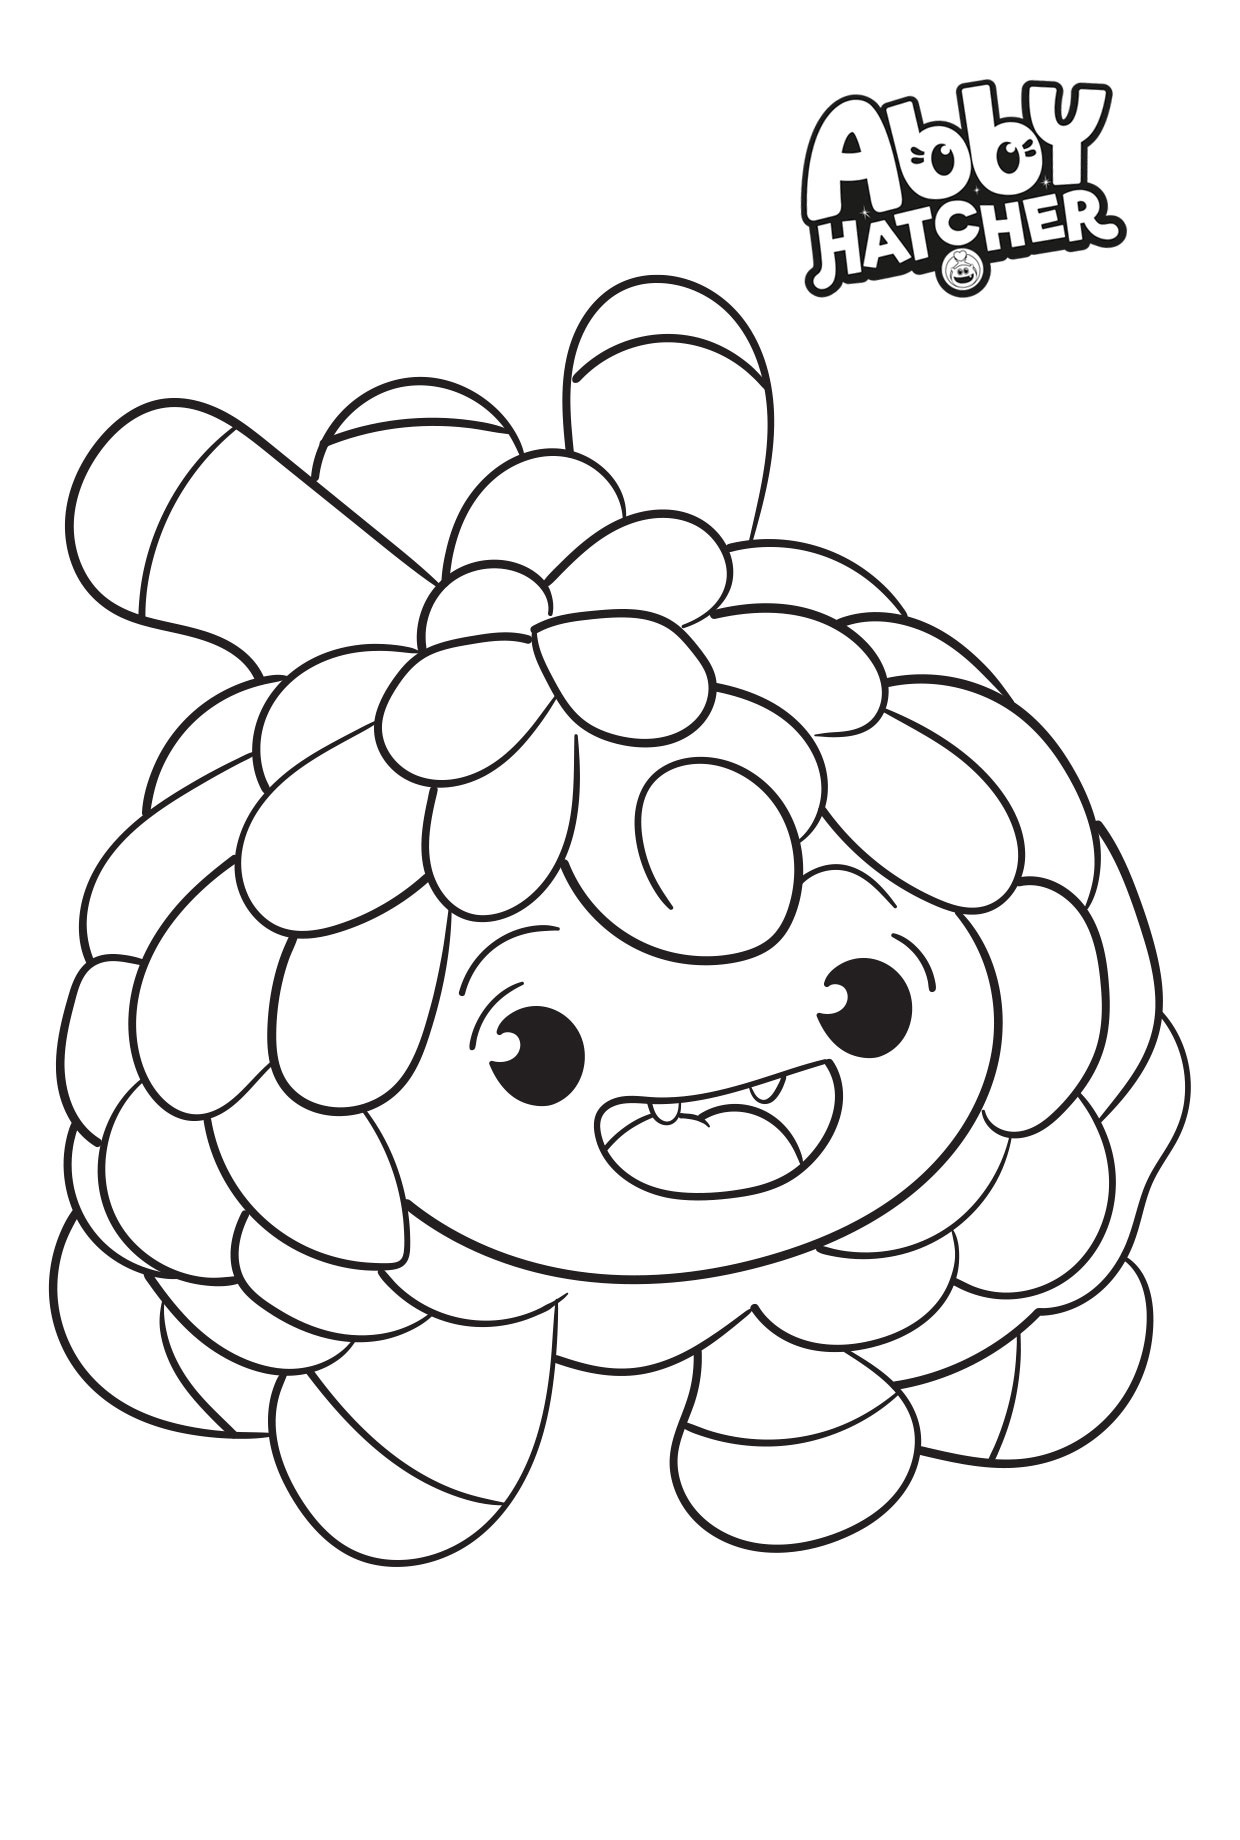 Printable Abby Hatcher Coloring Pages Pdf For Kids - Abby Hatcher Otis Coloring Page